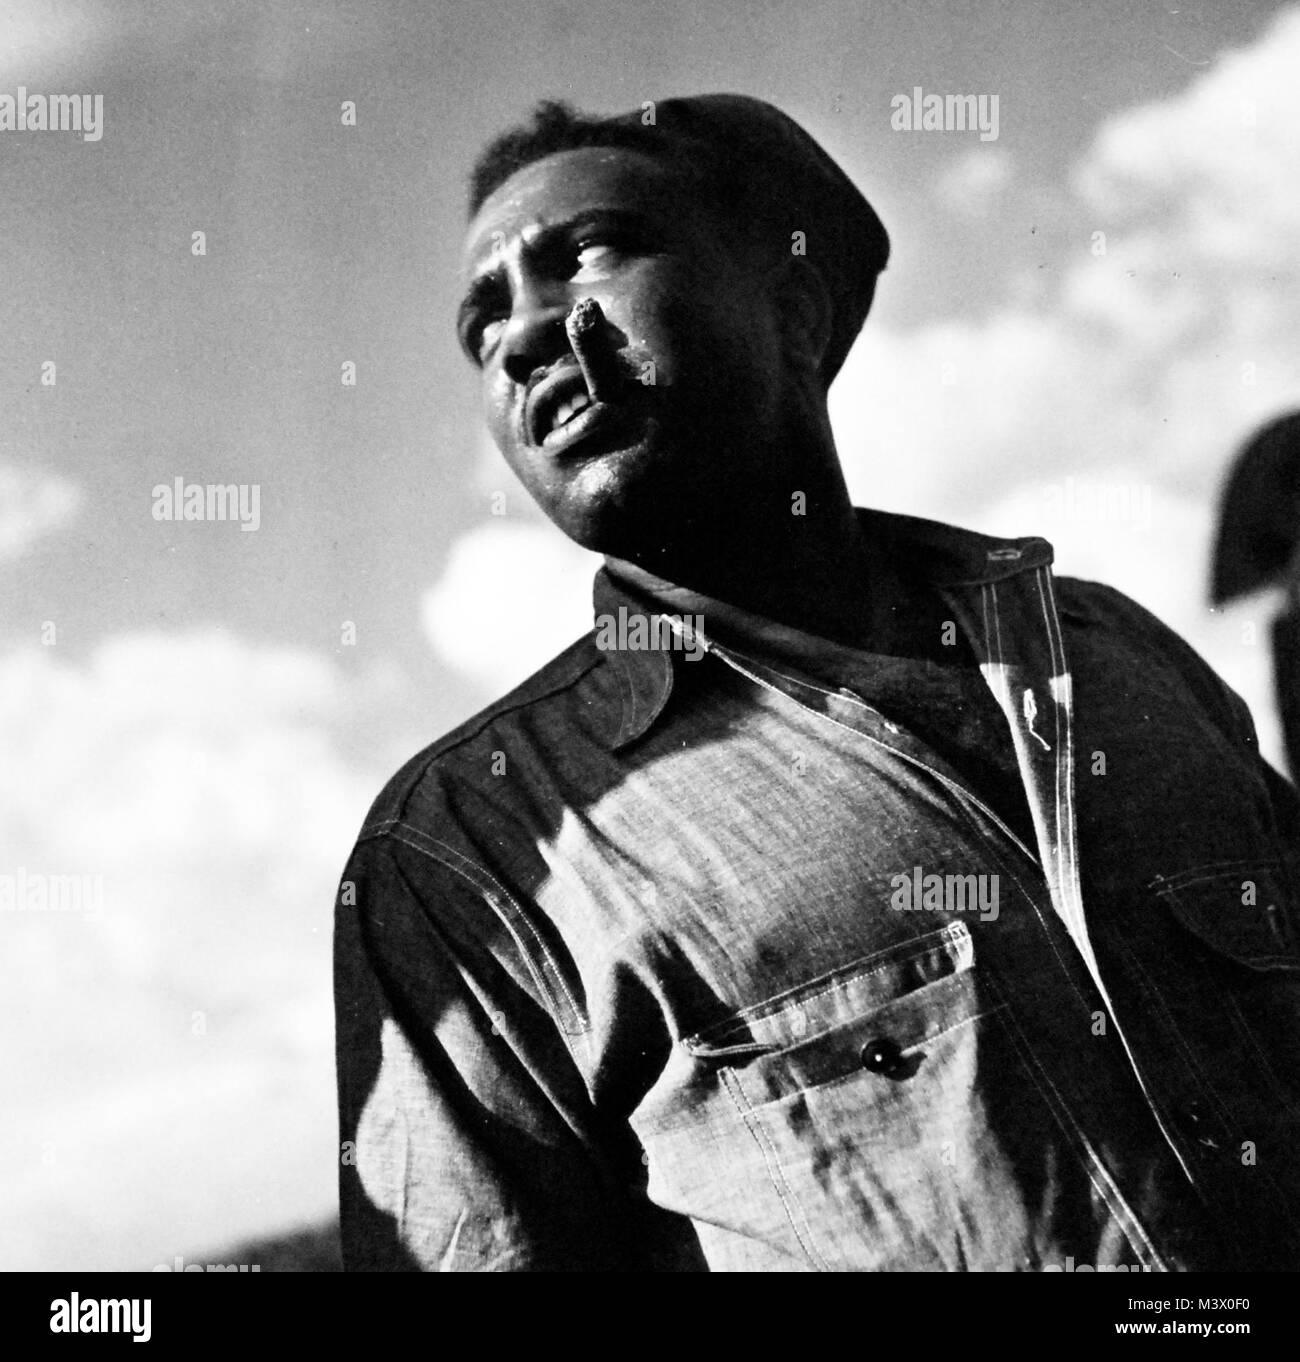 80-G-412869:  U.S. Naval Supply Depot, Guam, August 1945.  Sailor attached to the Depot.   Photographed by the Steichen Photographic Unit, TR-14967.  Official U.S. Navy Photograph, now in the collections of the National Archives.  (2018/01/31). 80-G-412869 25138158757 o Stock Photo